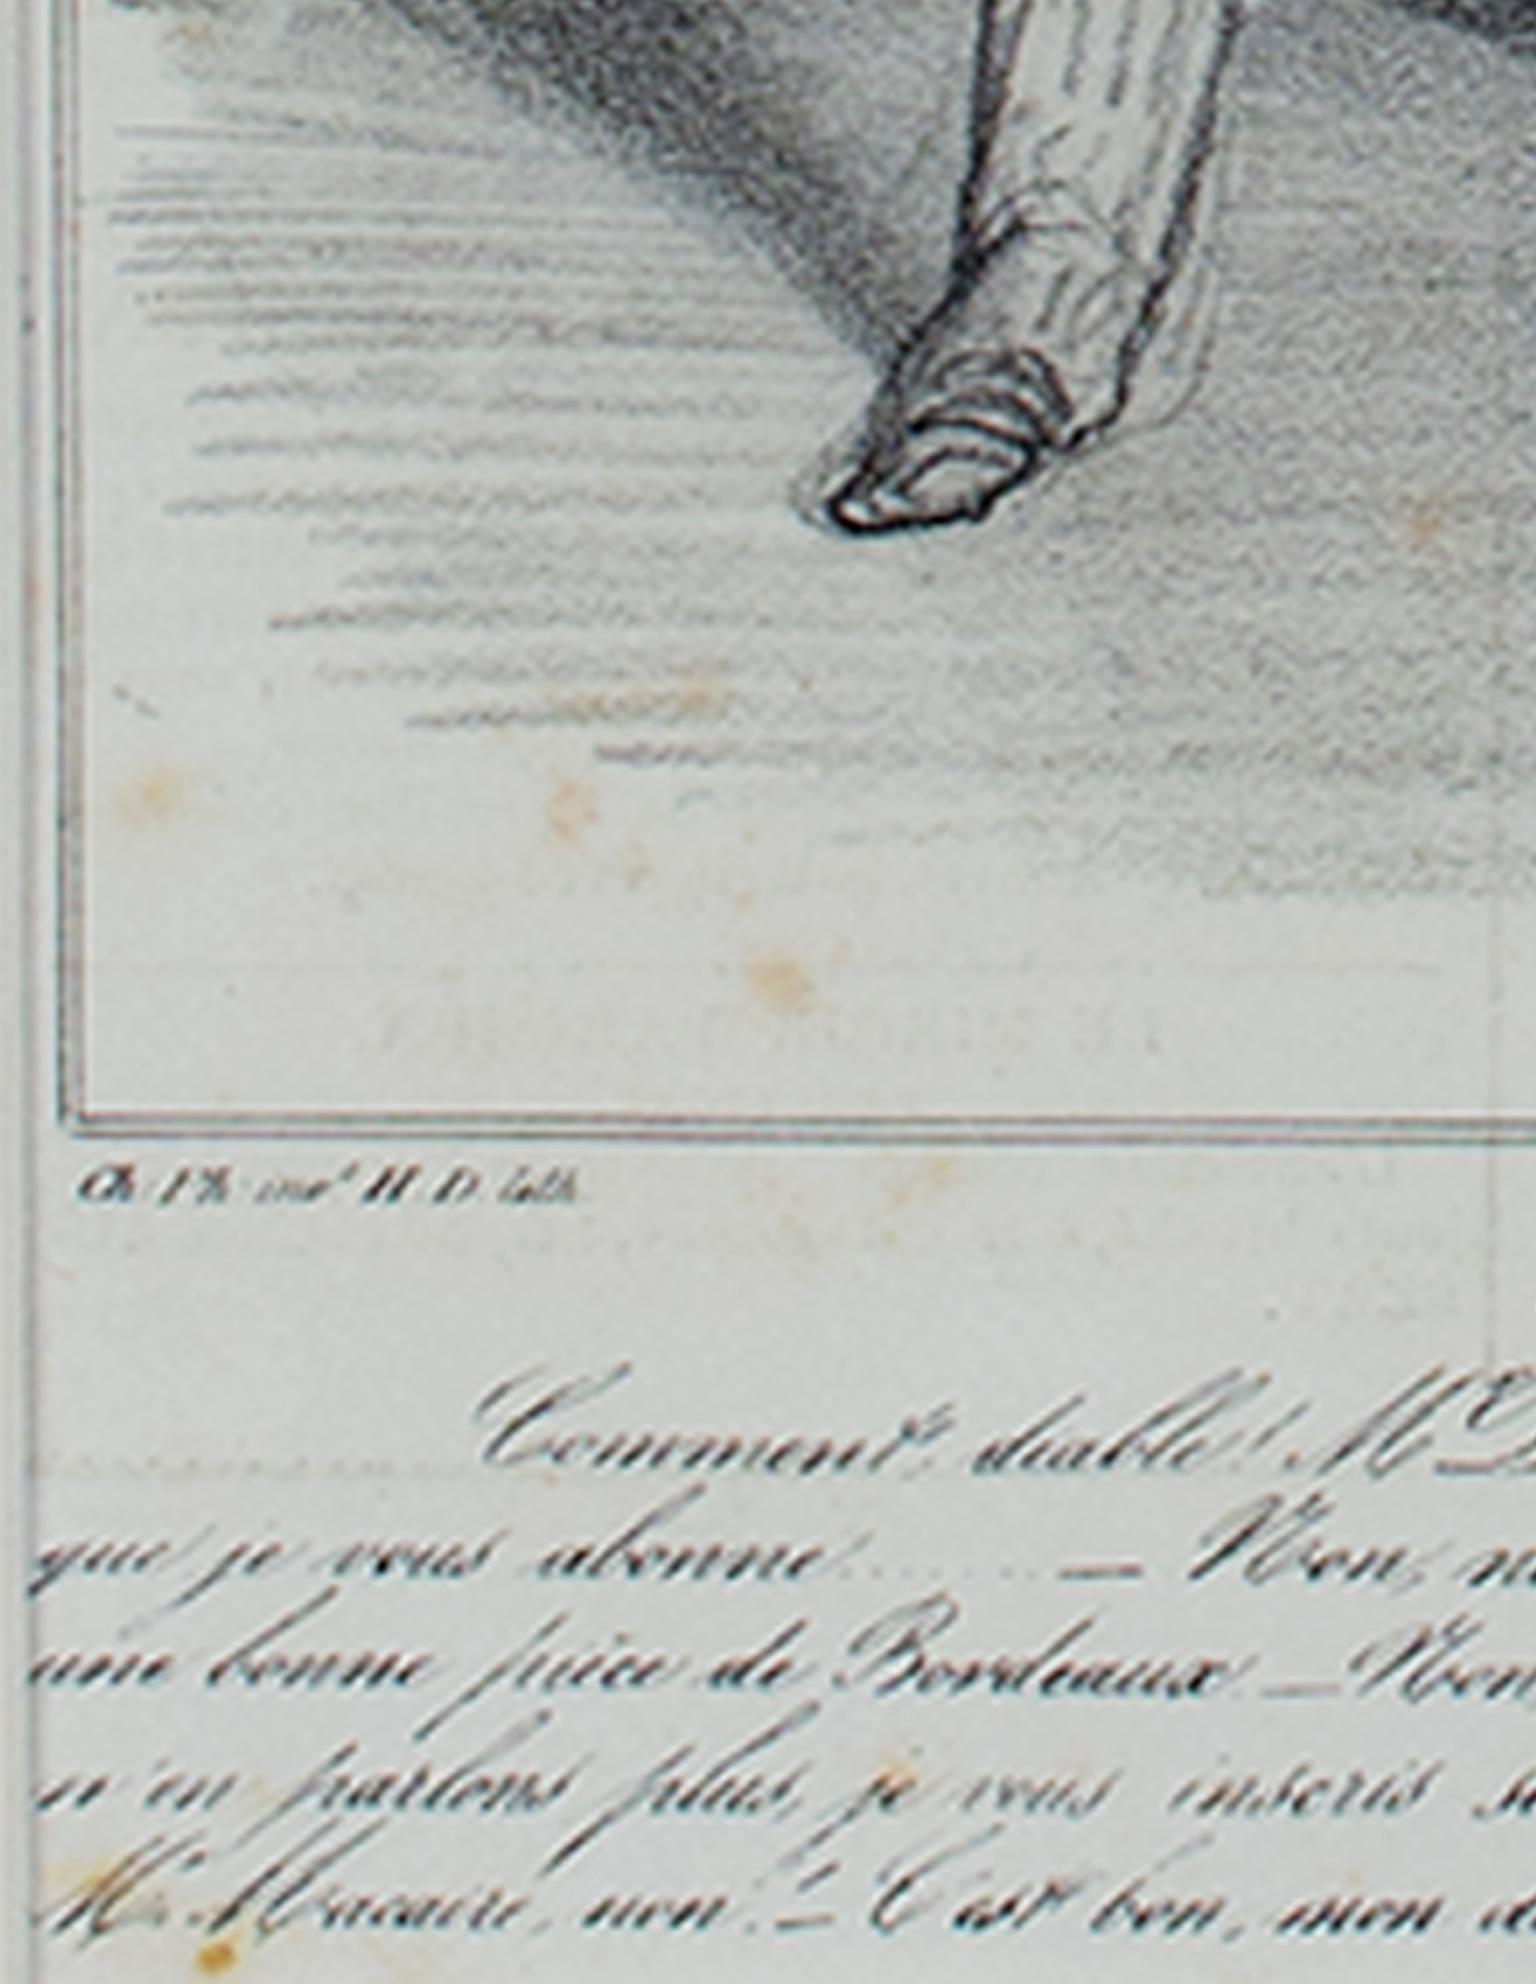 daumier was best known as a lithographer.